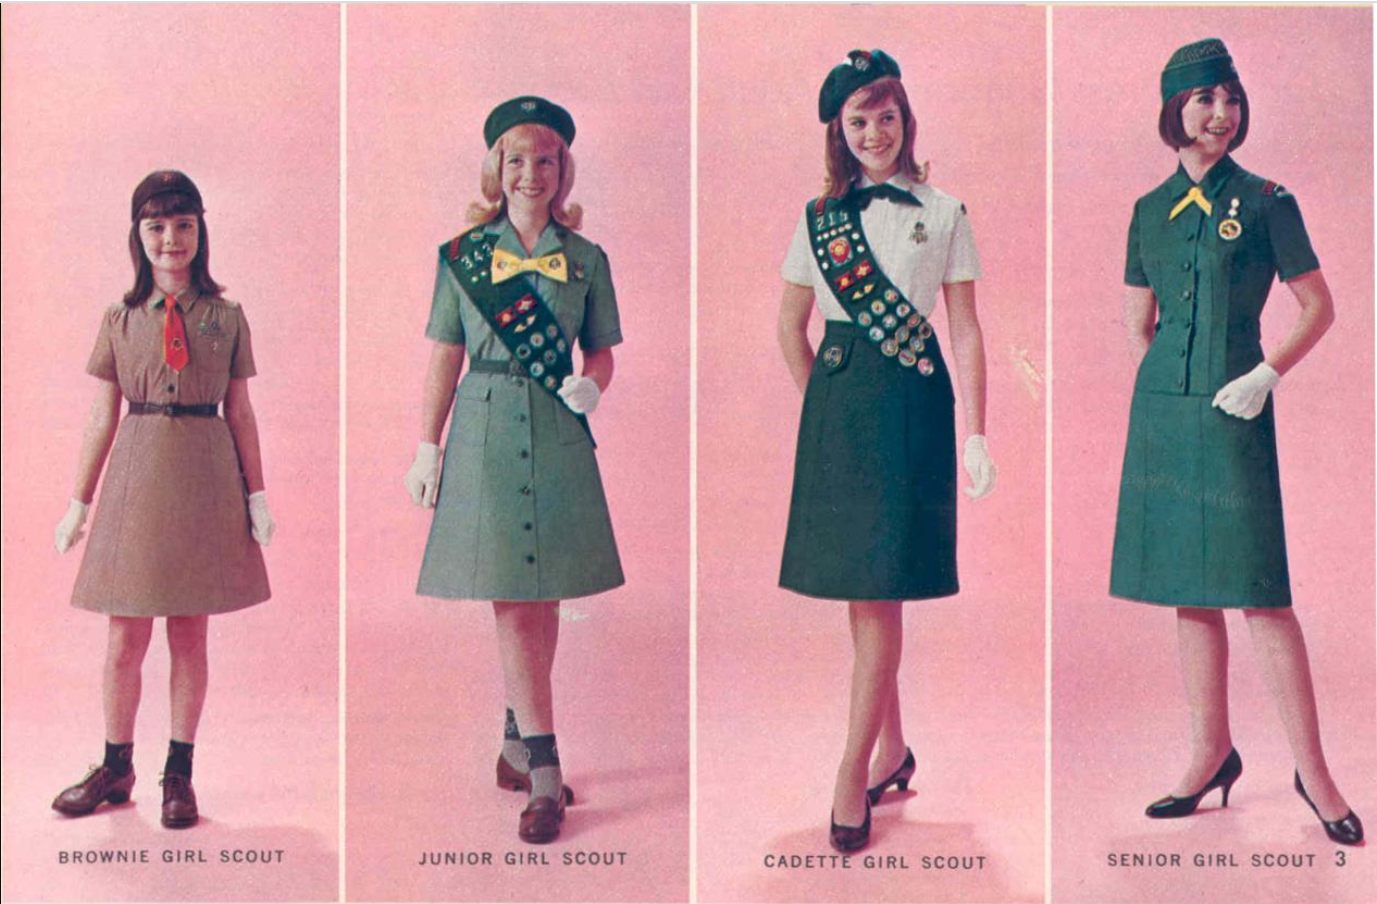 A Girl's Guide to Studying Girl Scout History | by Elsie Birnbaum | Medium